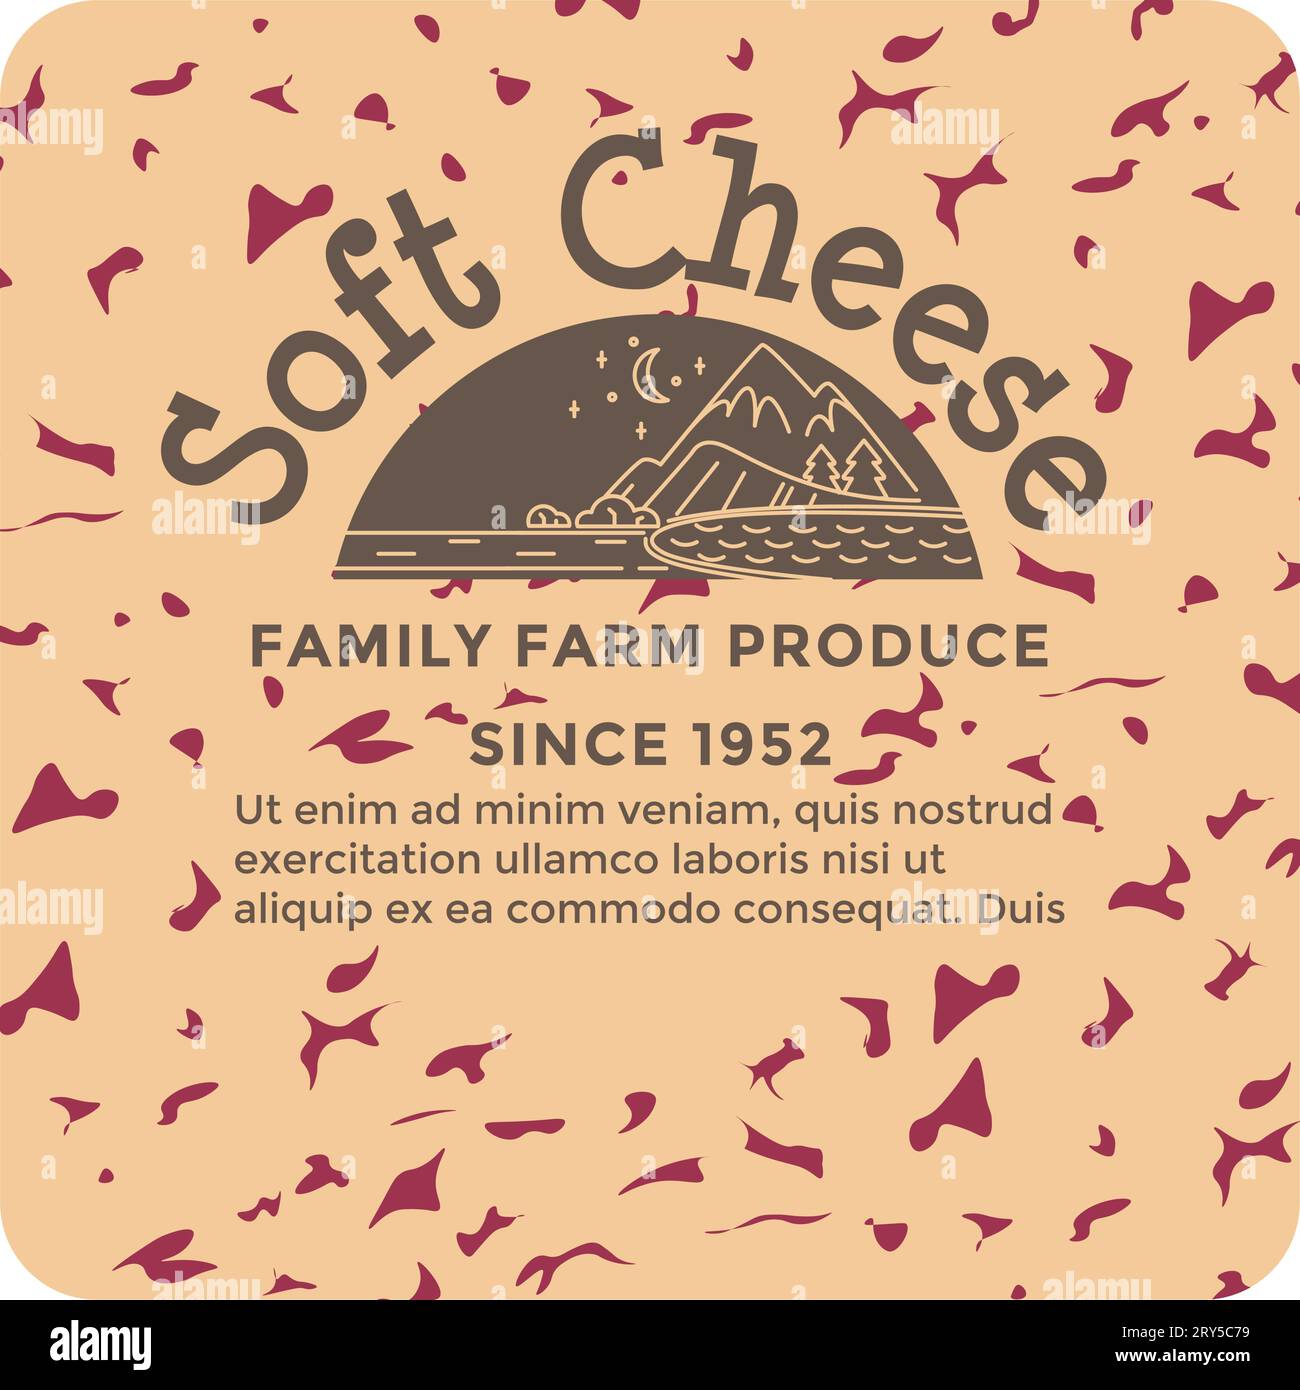 Family farm produce, soft cheese production label Stock Vector